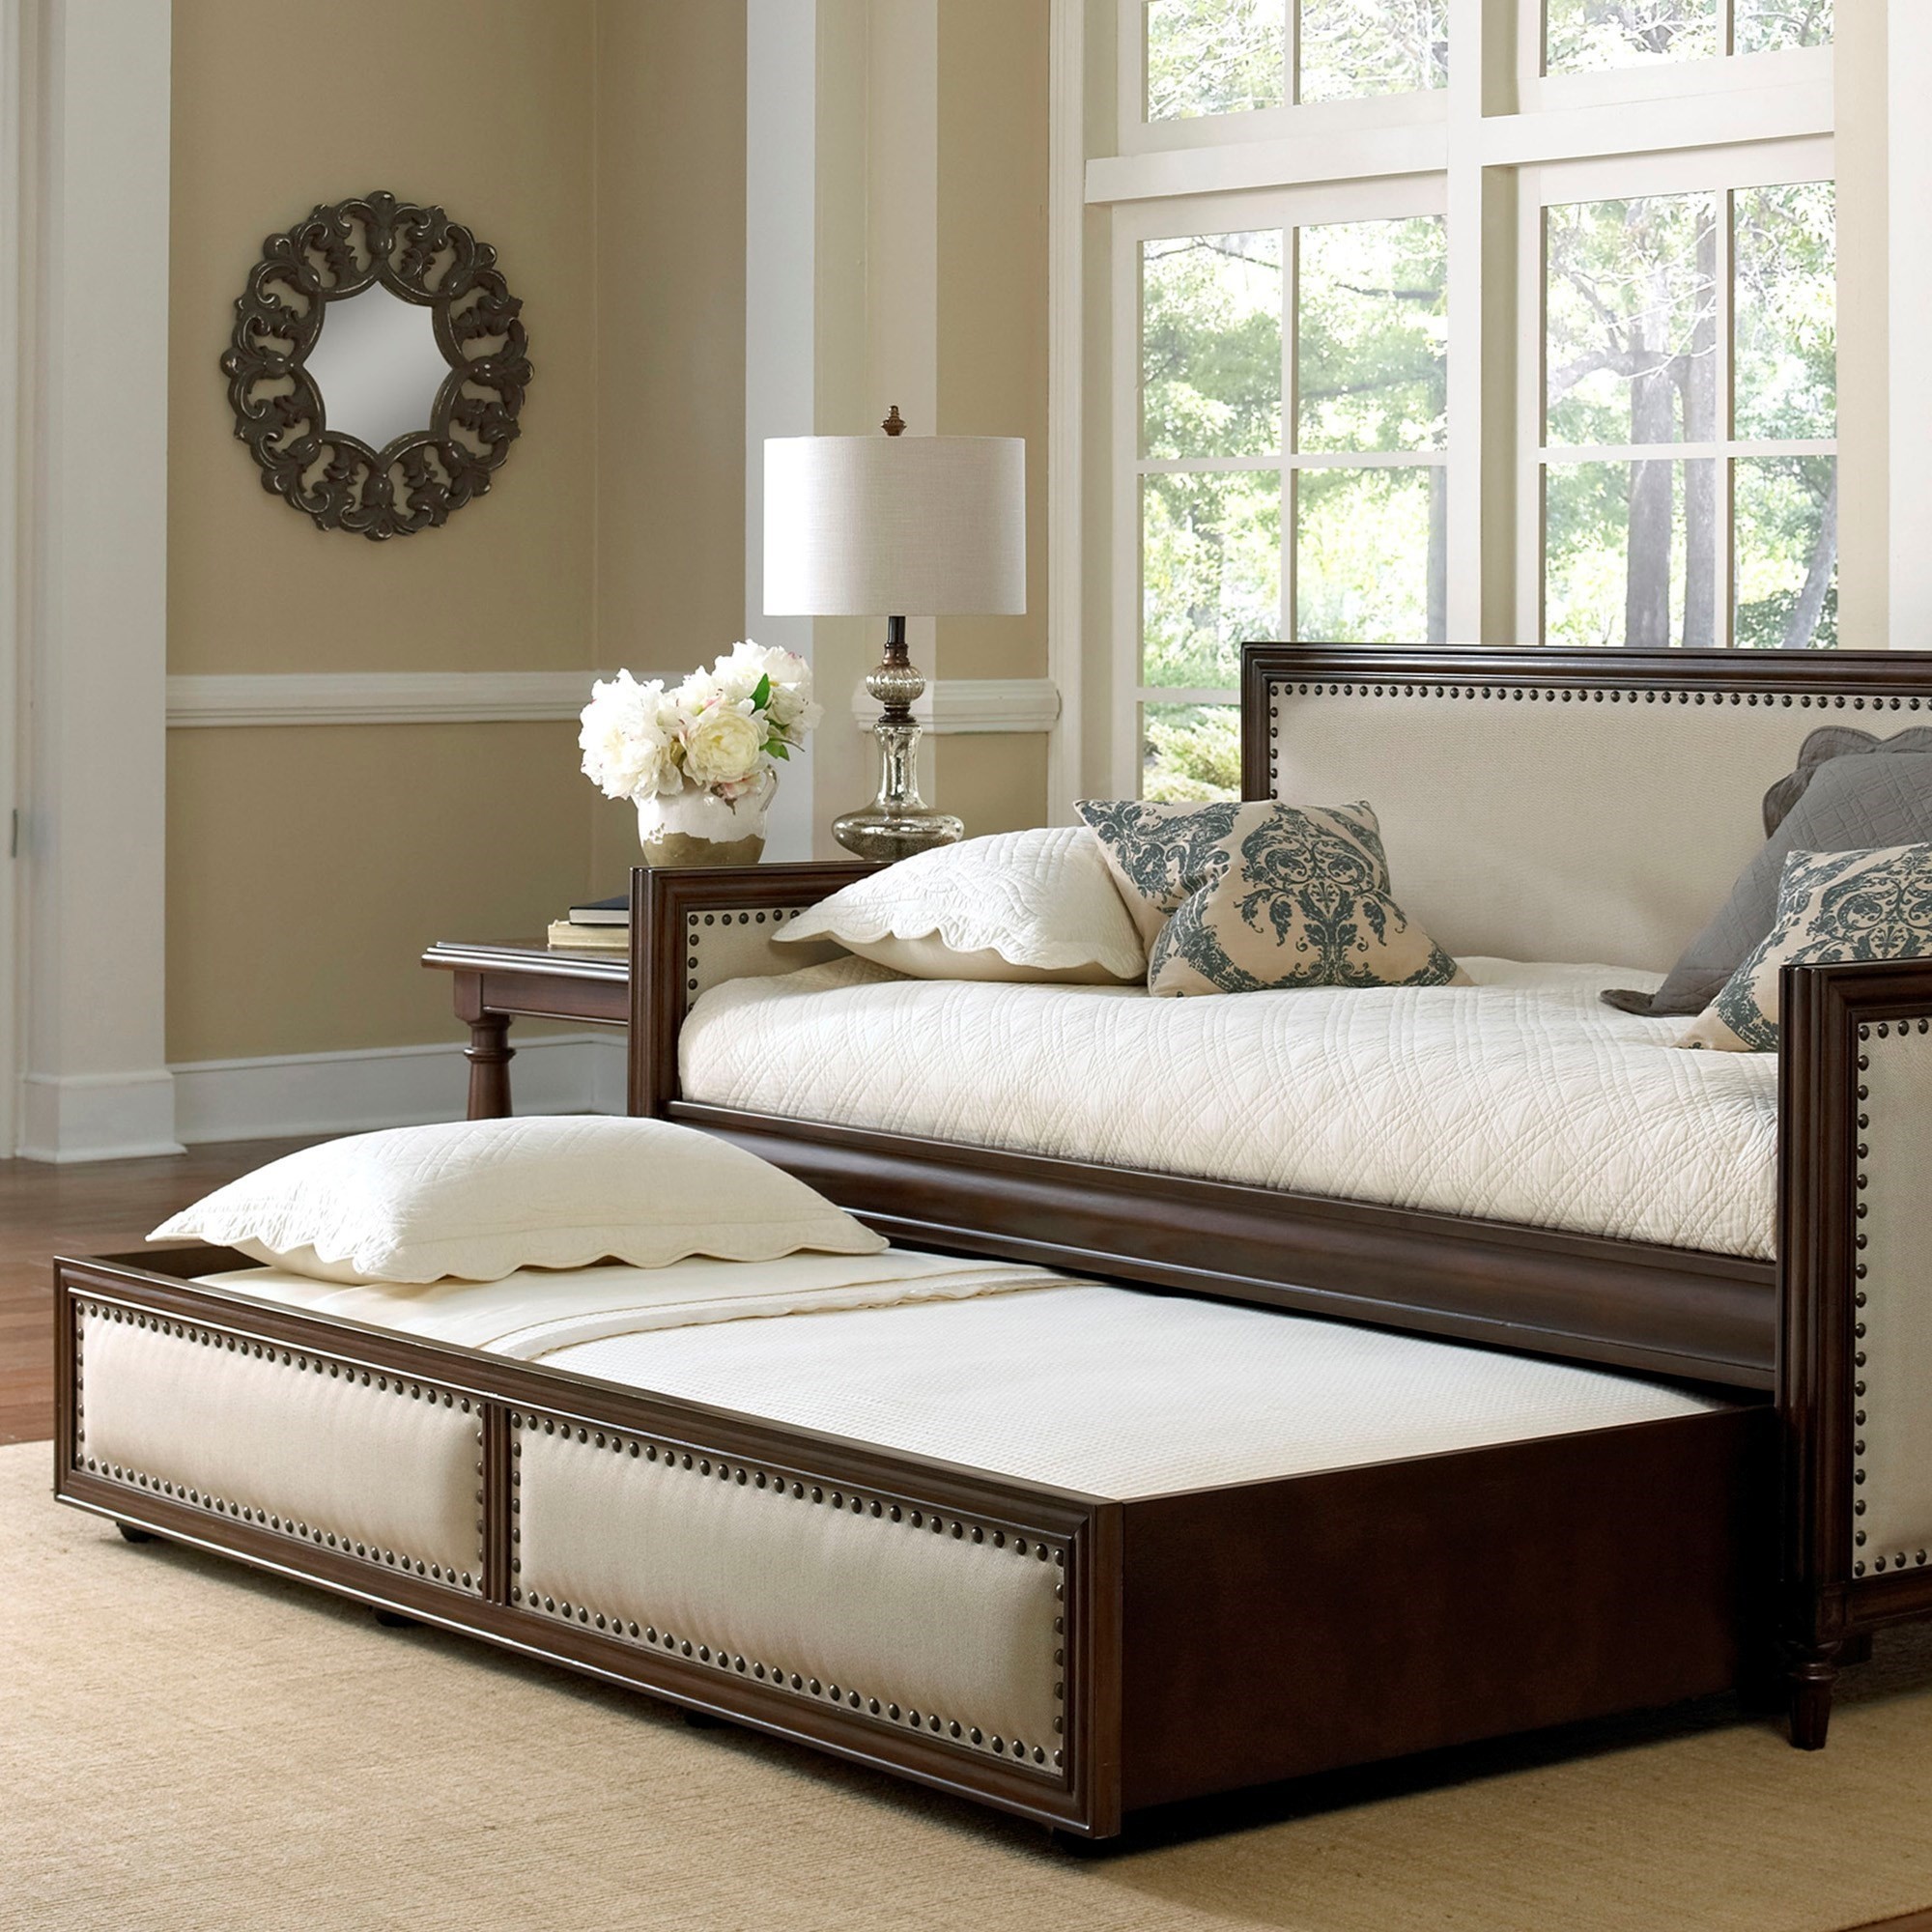 Fashion bed group daybeds roll out wood trundle drawer for